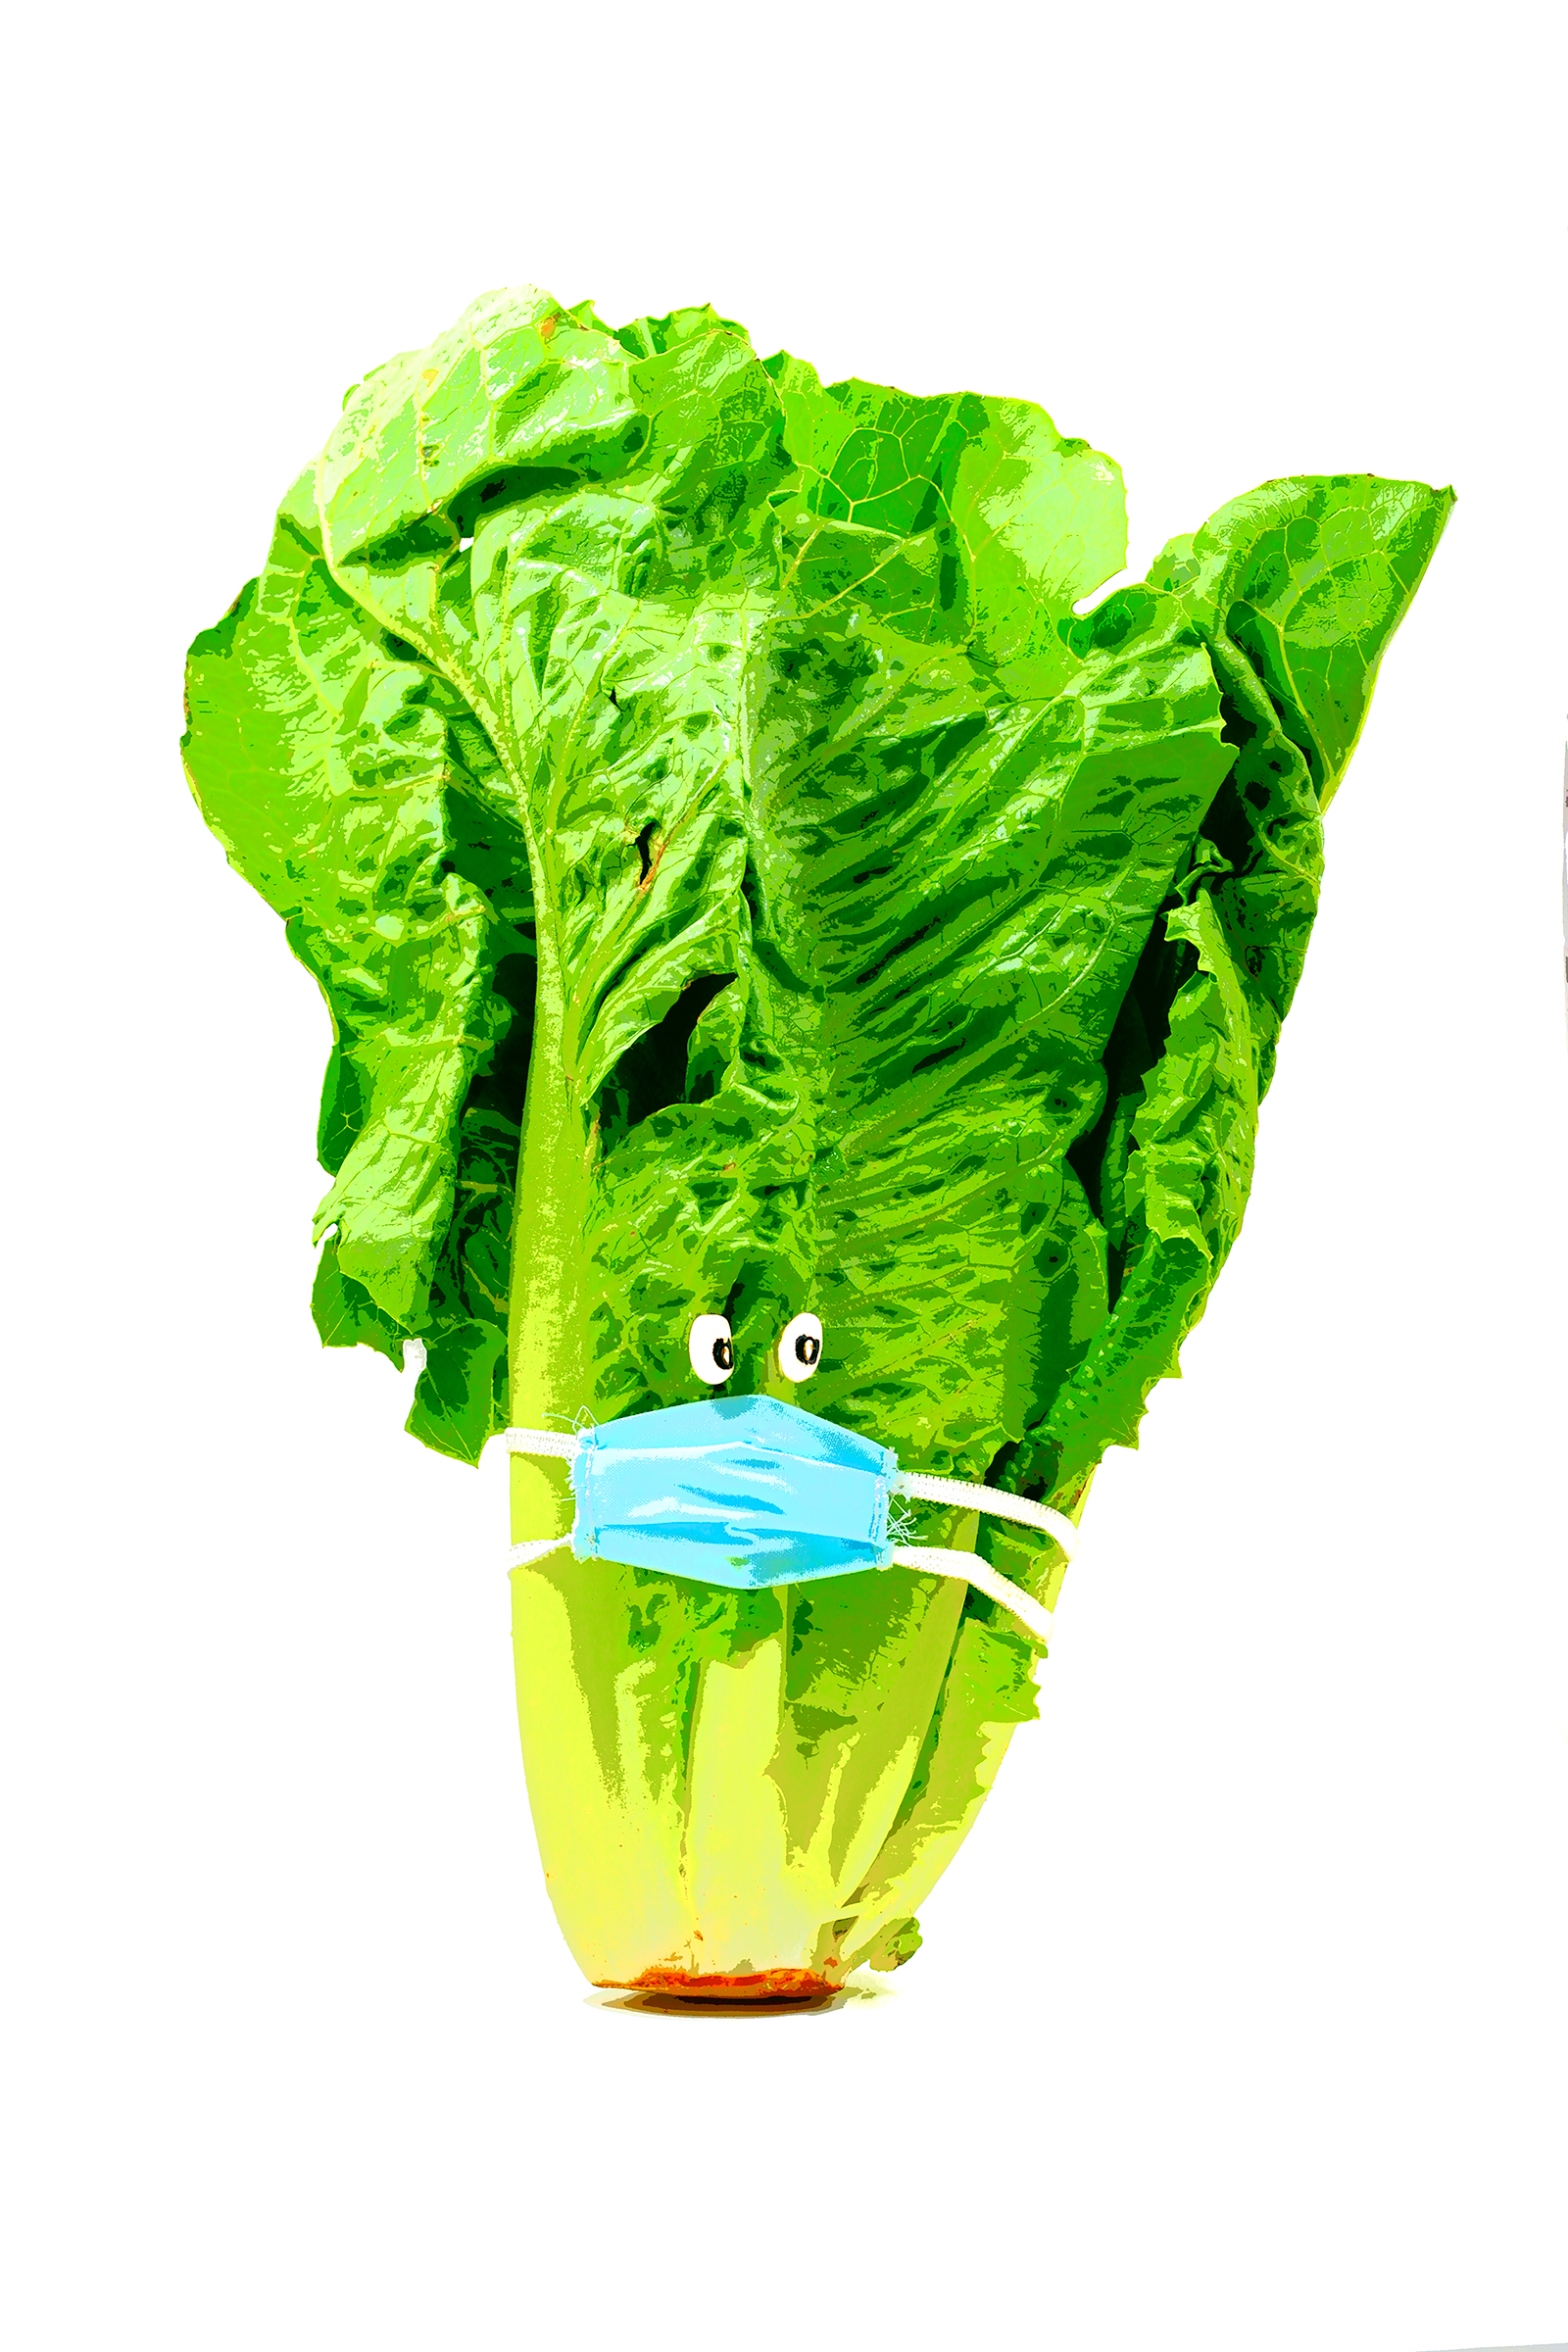 Romaine Calm, by Dave Rothstein